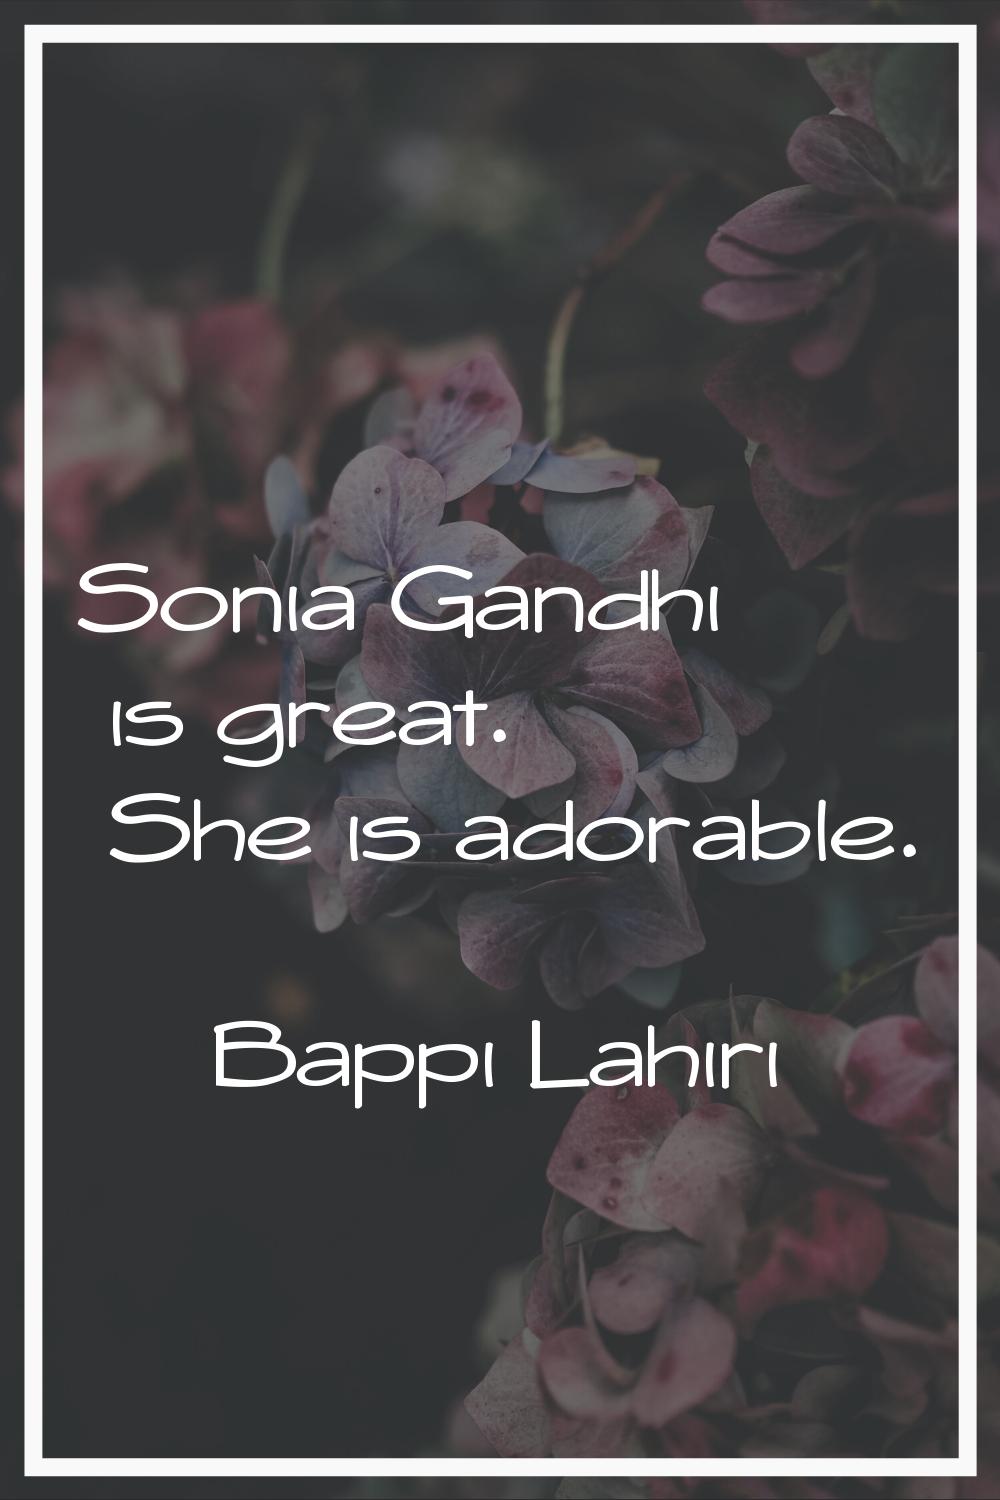 Sonia Gandhi is great. She is adorable.